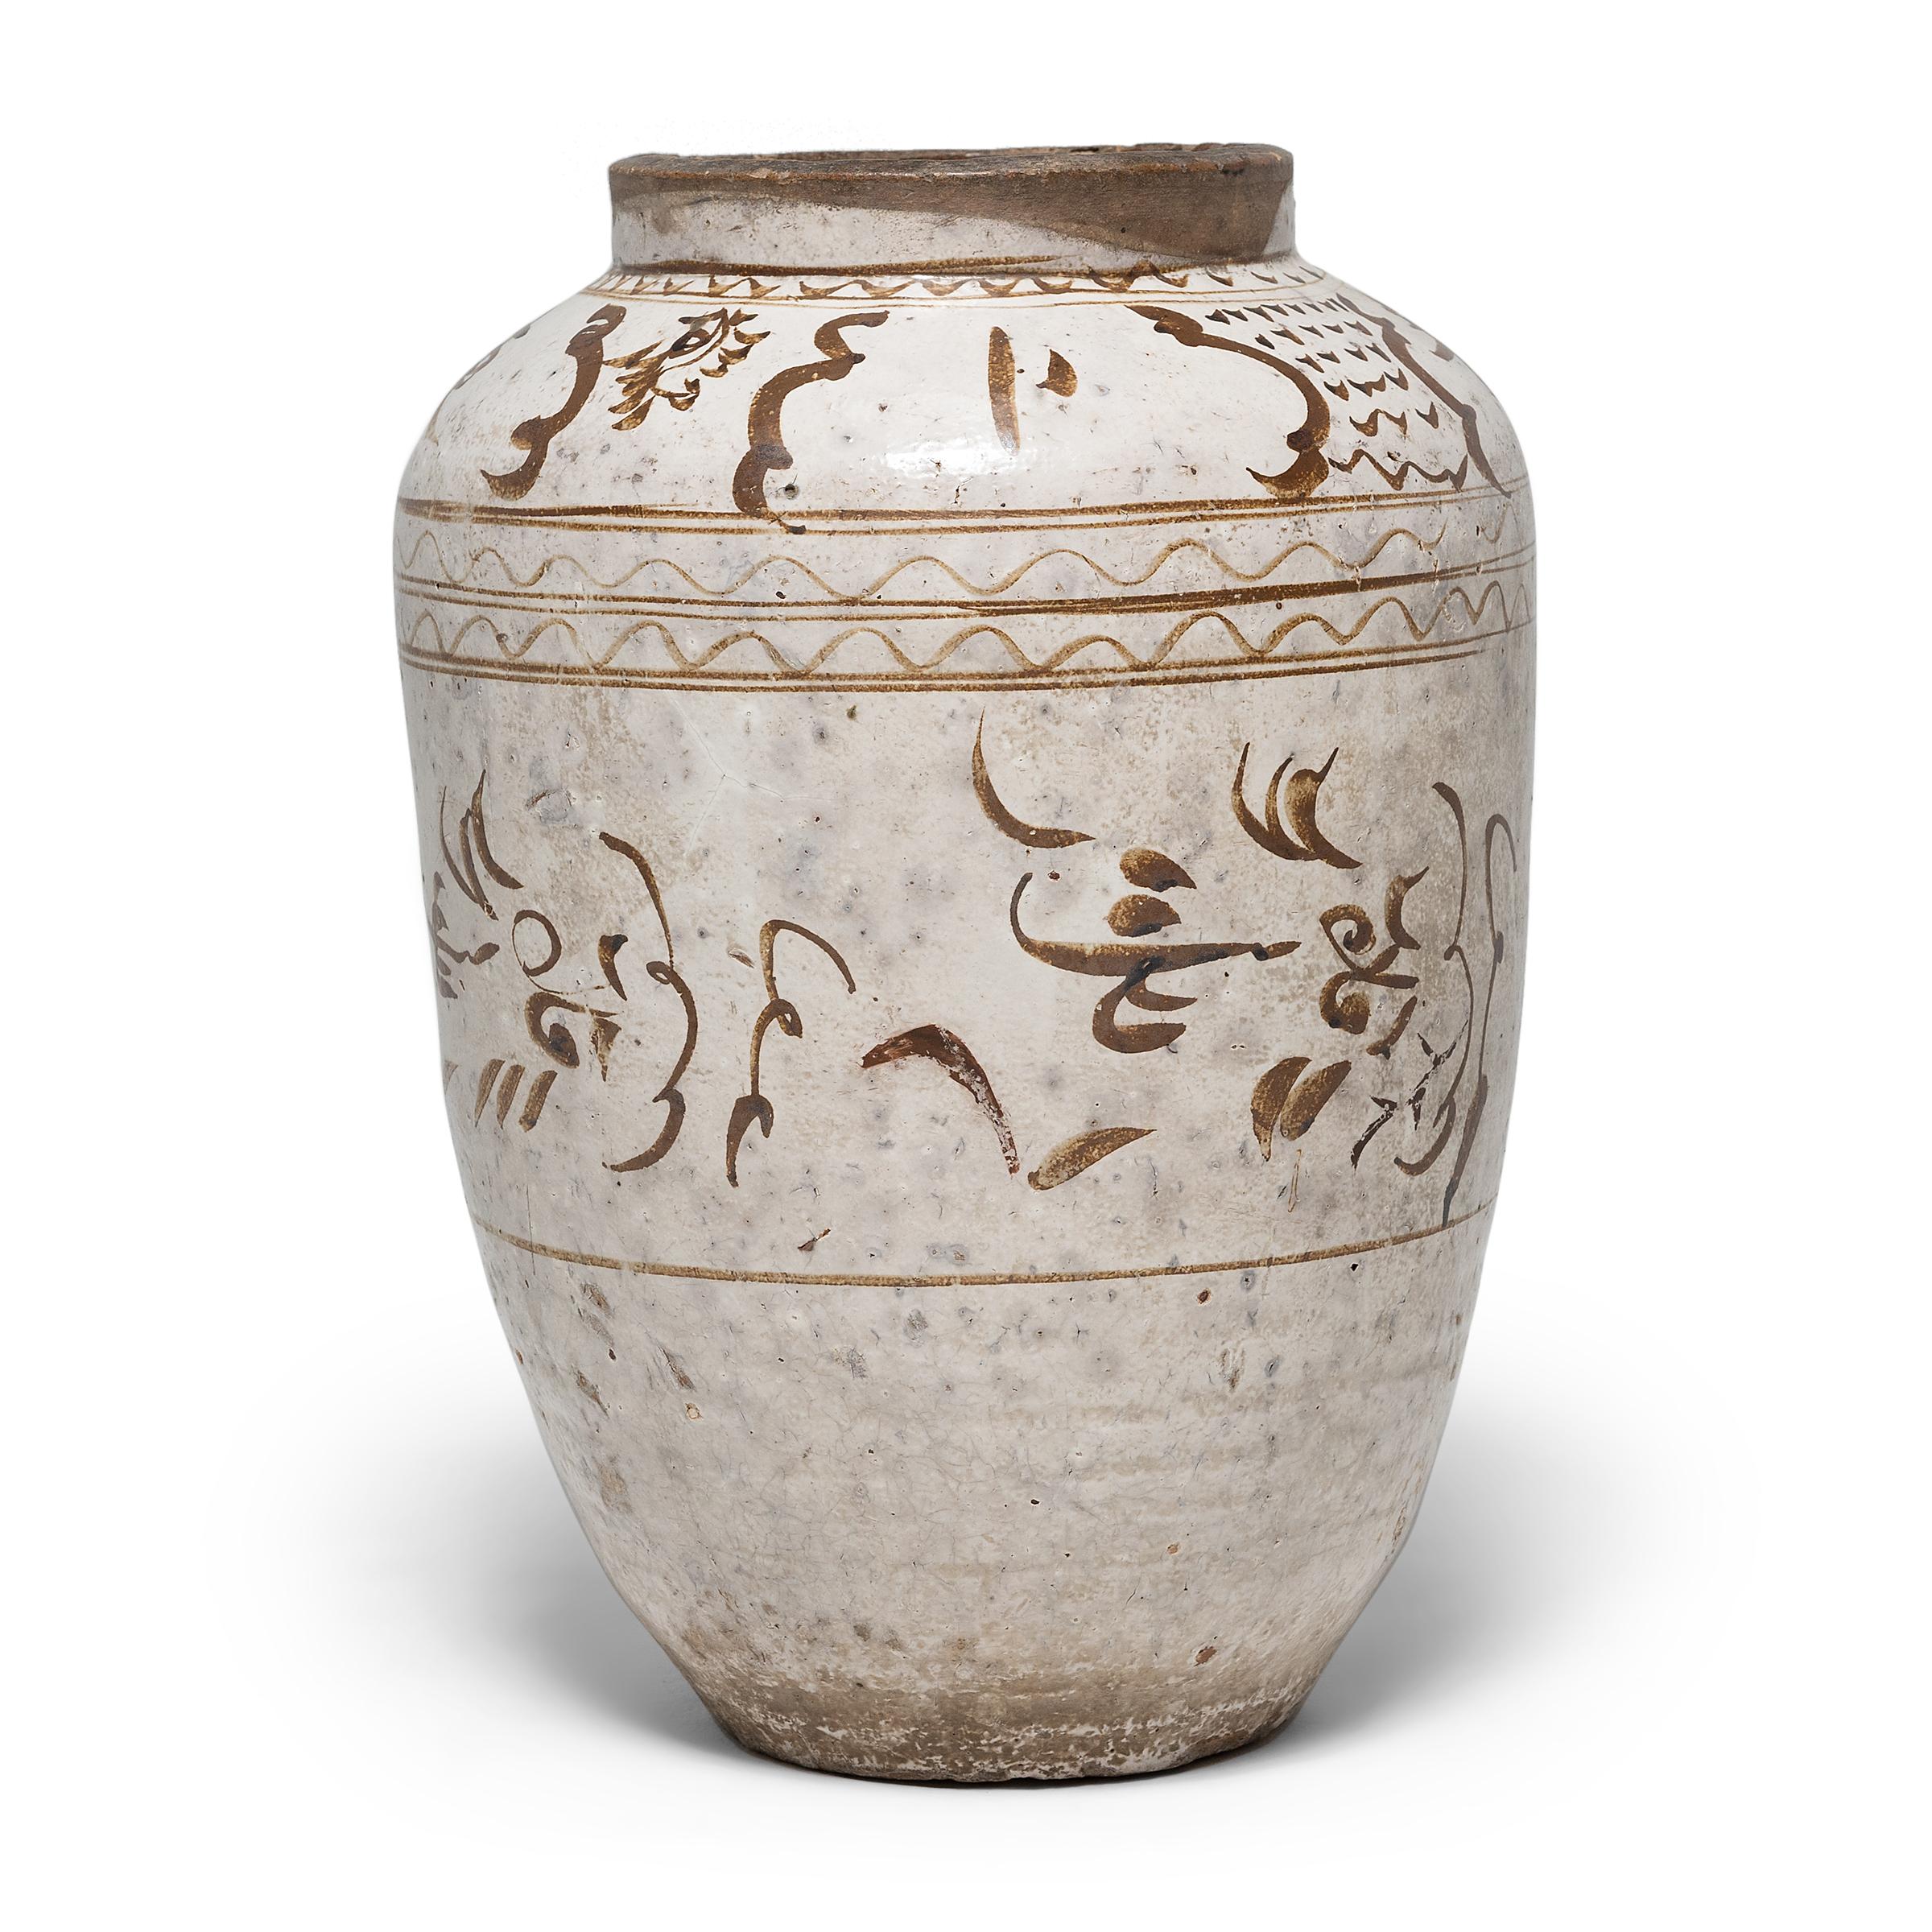 This impressive glazed vessel dates to the early 17th century and was used to store condiments or pickles in a Ming-dynasty kitchen. The grand jar has an elegant, tapered form and is beautifully glazed with neutral earth-tones in a style